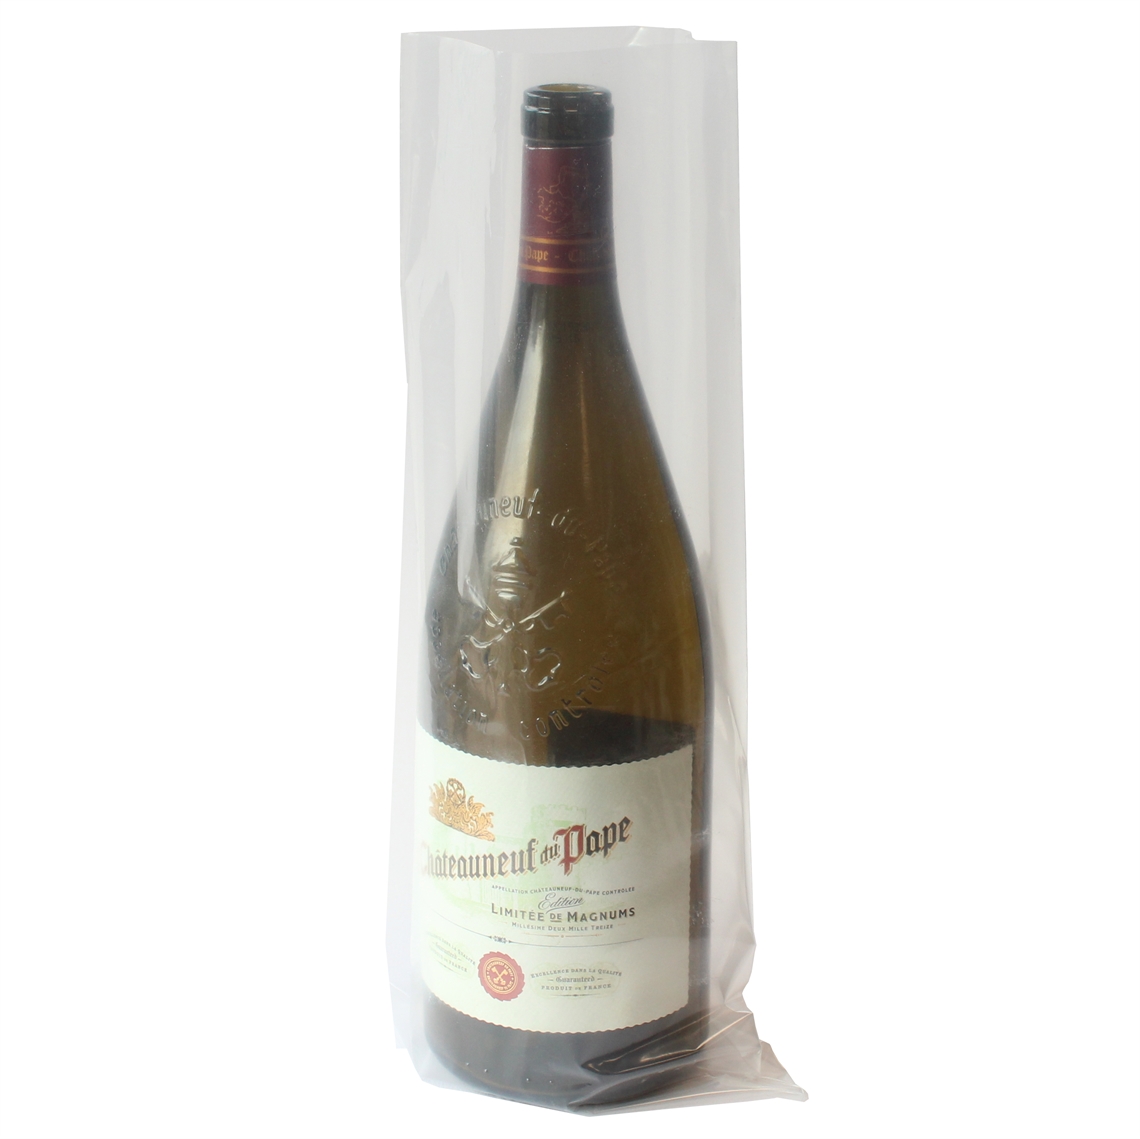 View more branded antiox wine preserver from our Wine Bottle Cellar Sleeves range